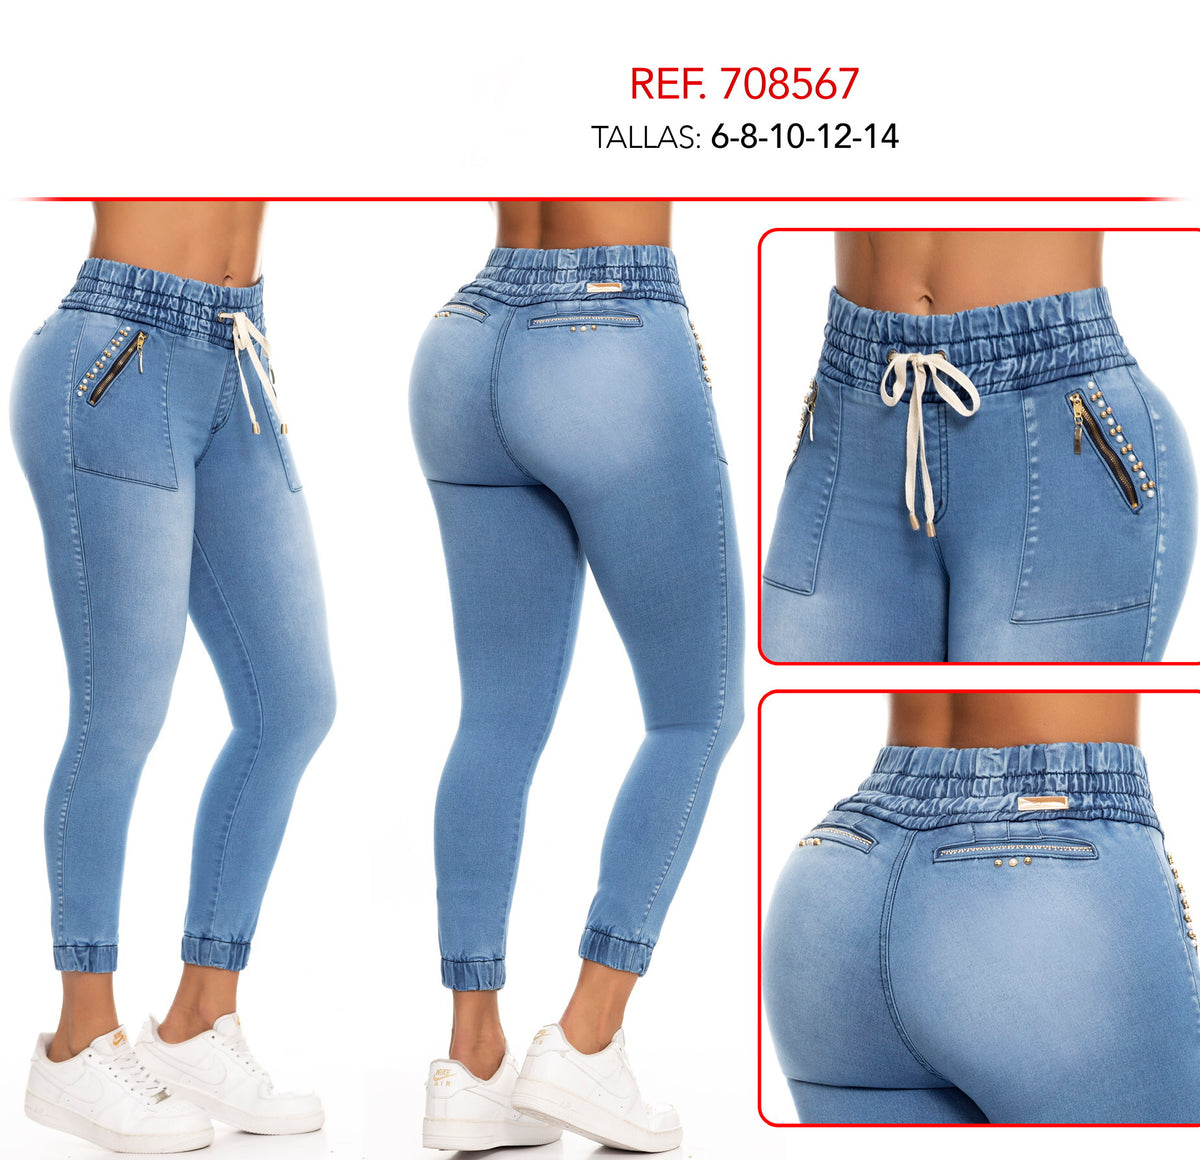 Jeans Colombiano G2256